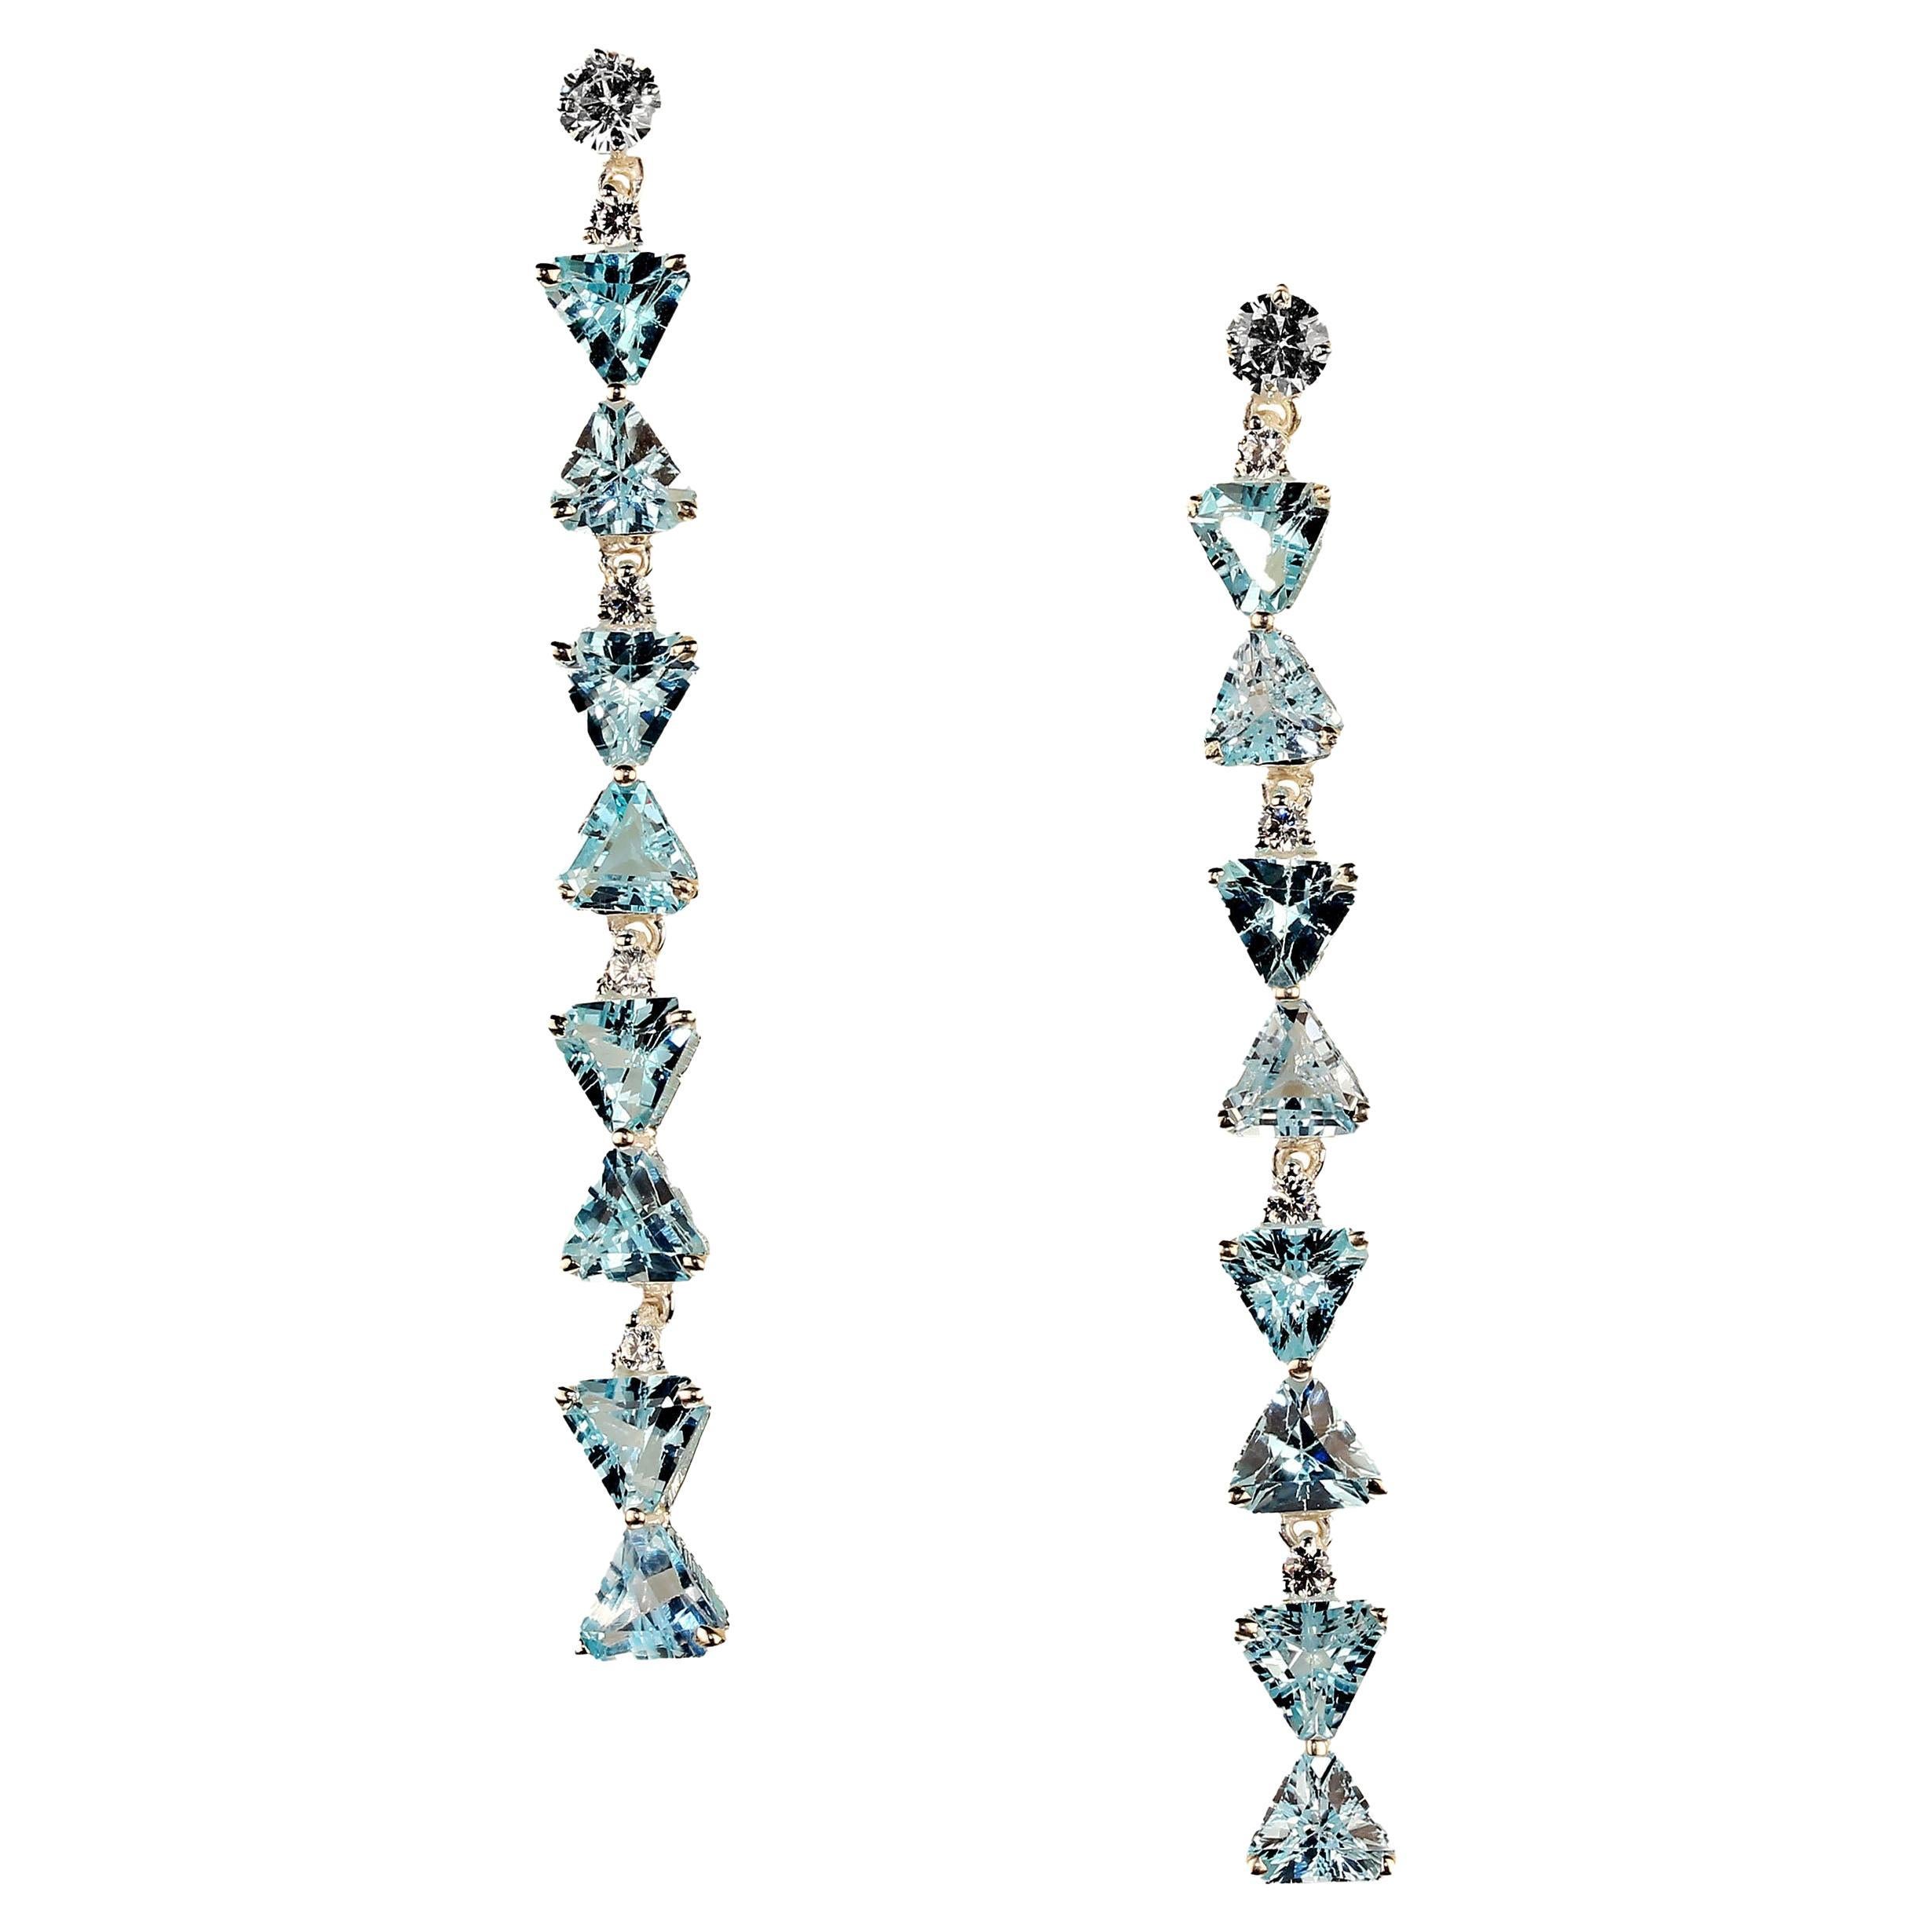 2.25 Inch dangle bedazzling Blue Topaz earrings.  These lines of kissing trillion Blue Topaz interspursed with genuine zircons are truly sparklers.  These Blue Topaz weigh 9.55ctw.  The genuine zircons weigh 1.29ctw. The gemstones are set in